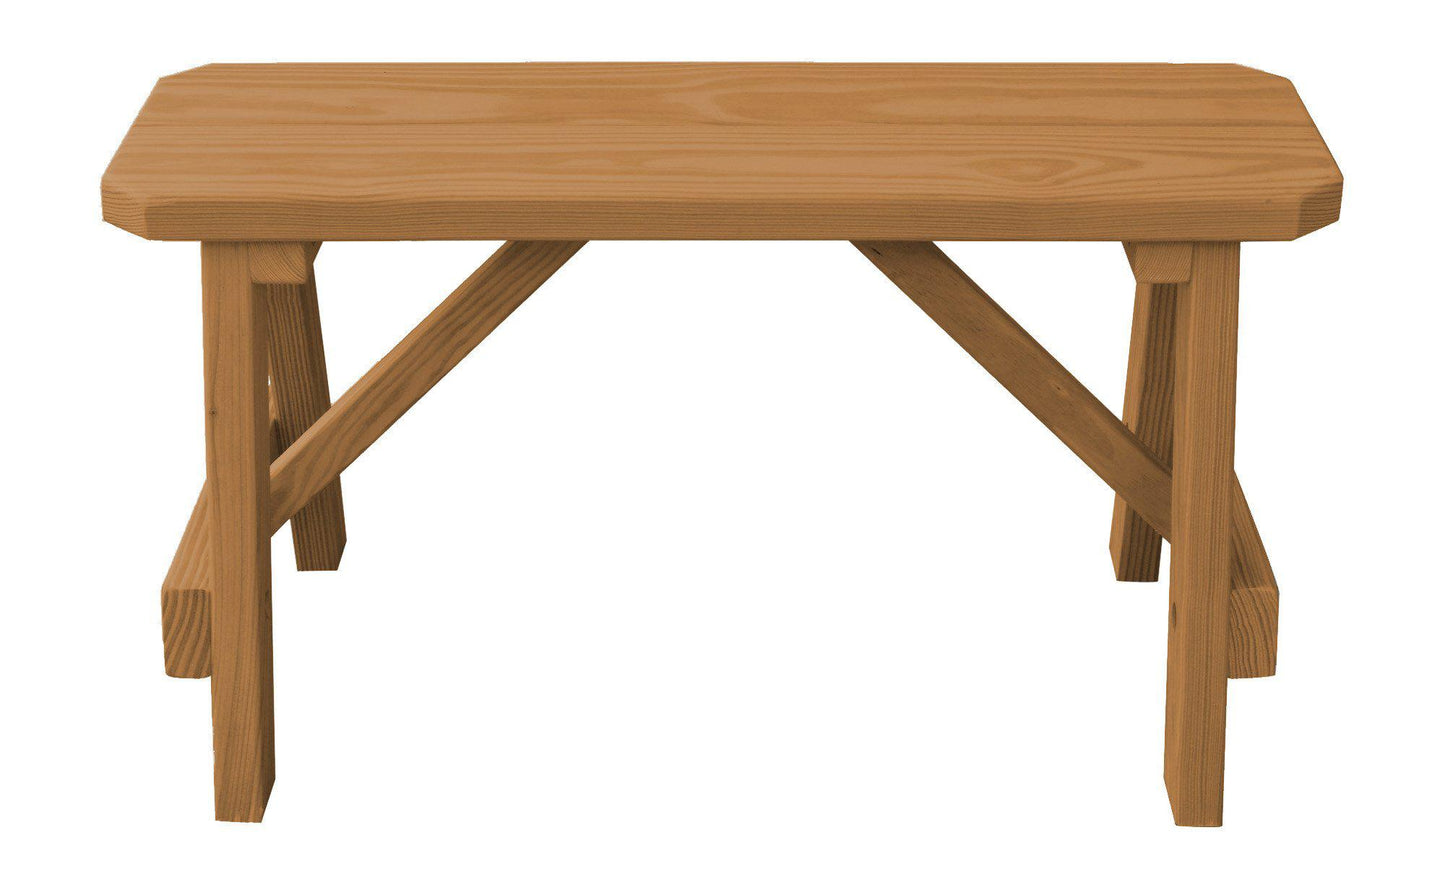 A&L Furniture Co. Yellow Pine 33" Traditional Bench Only - LEAD TIME TO SHIP 10 BUSINESS DAYS